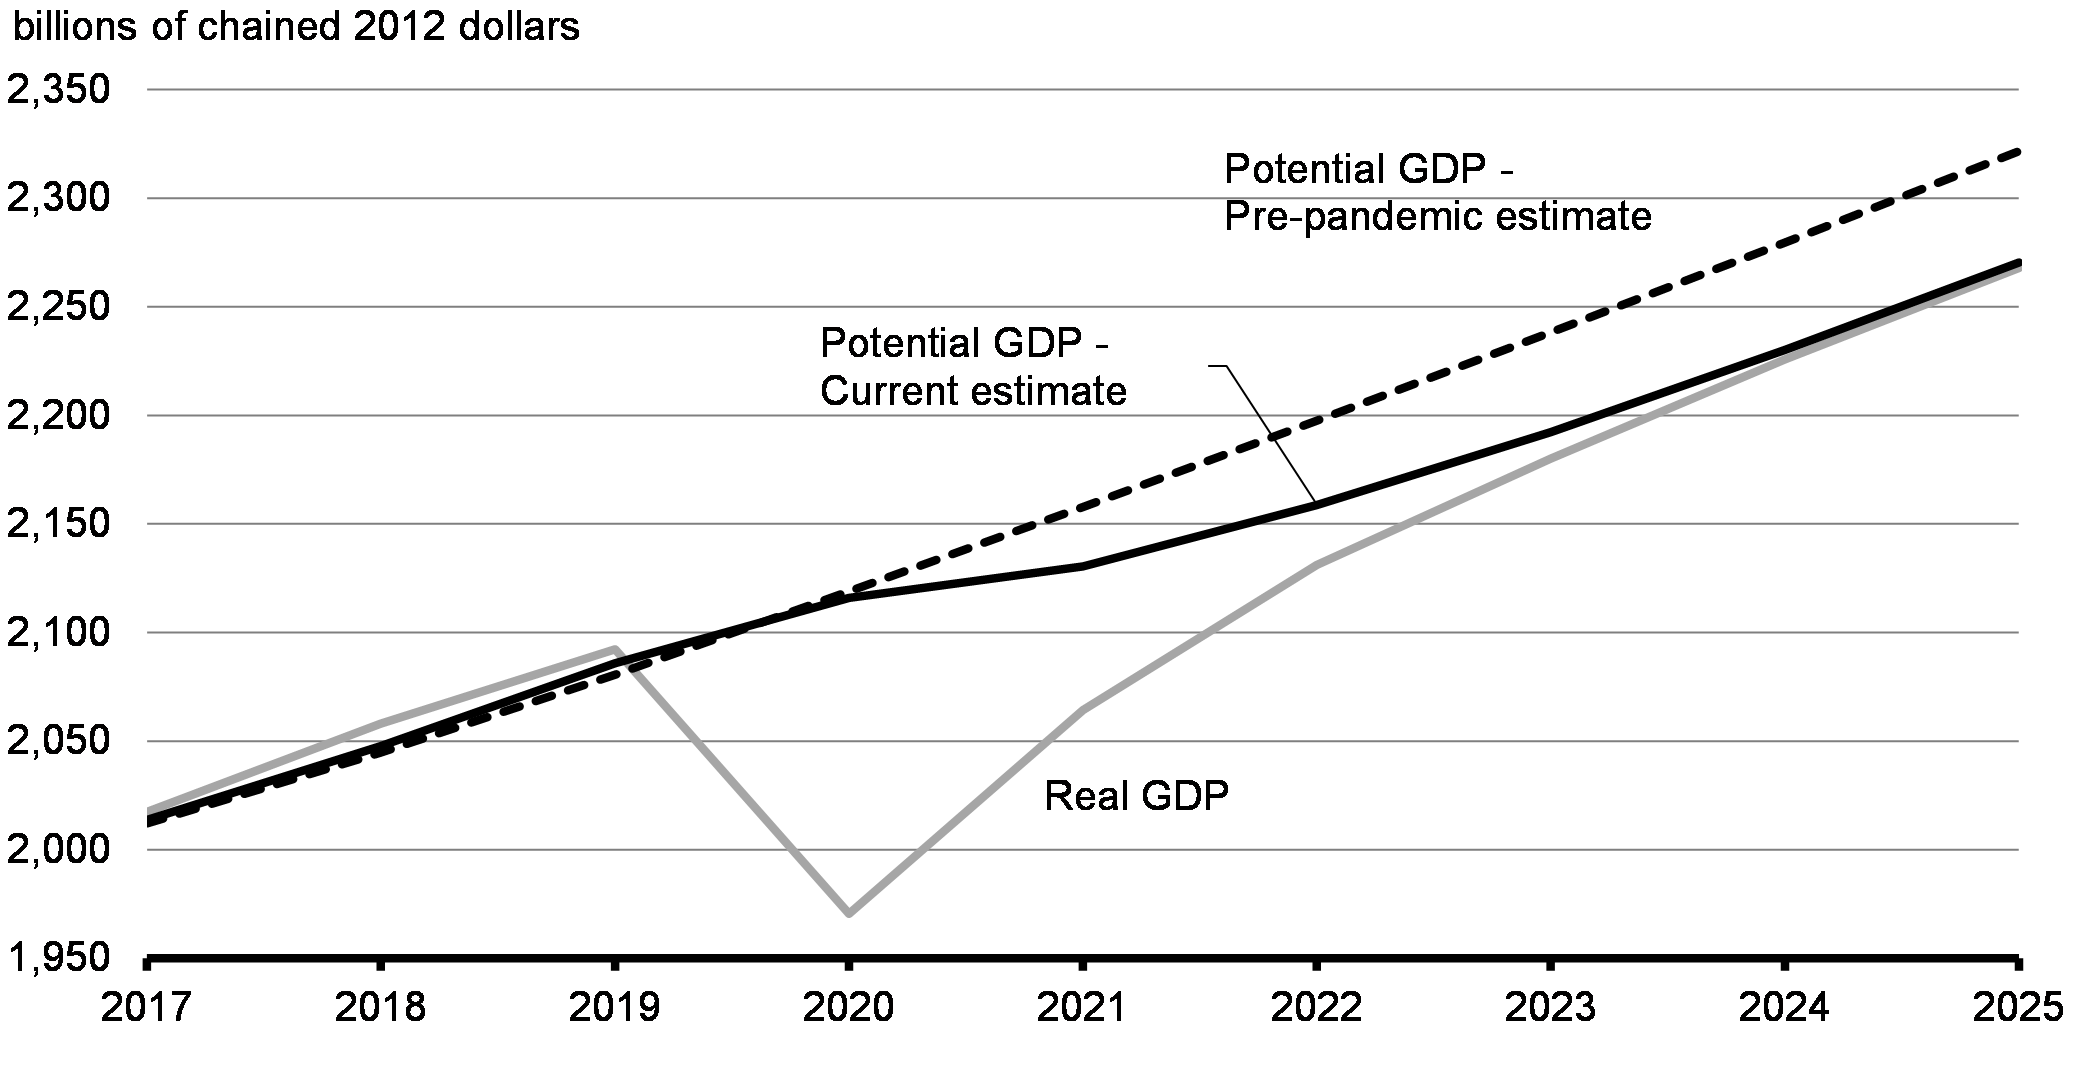 Chart 3.9: Revision to Potential GDP Estimate